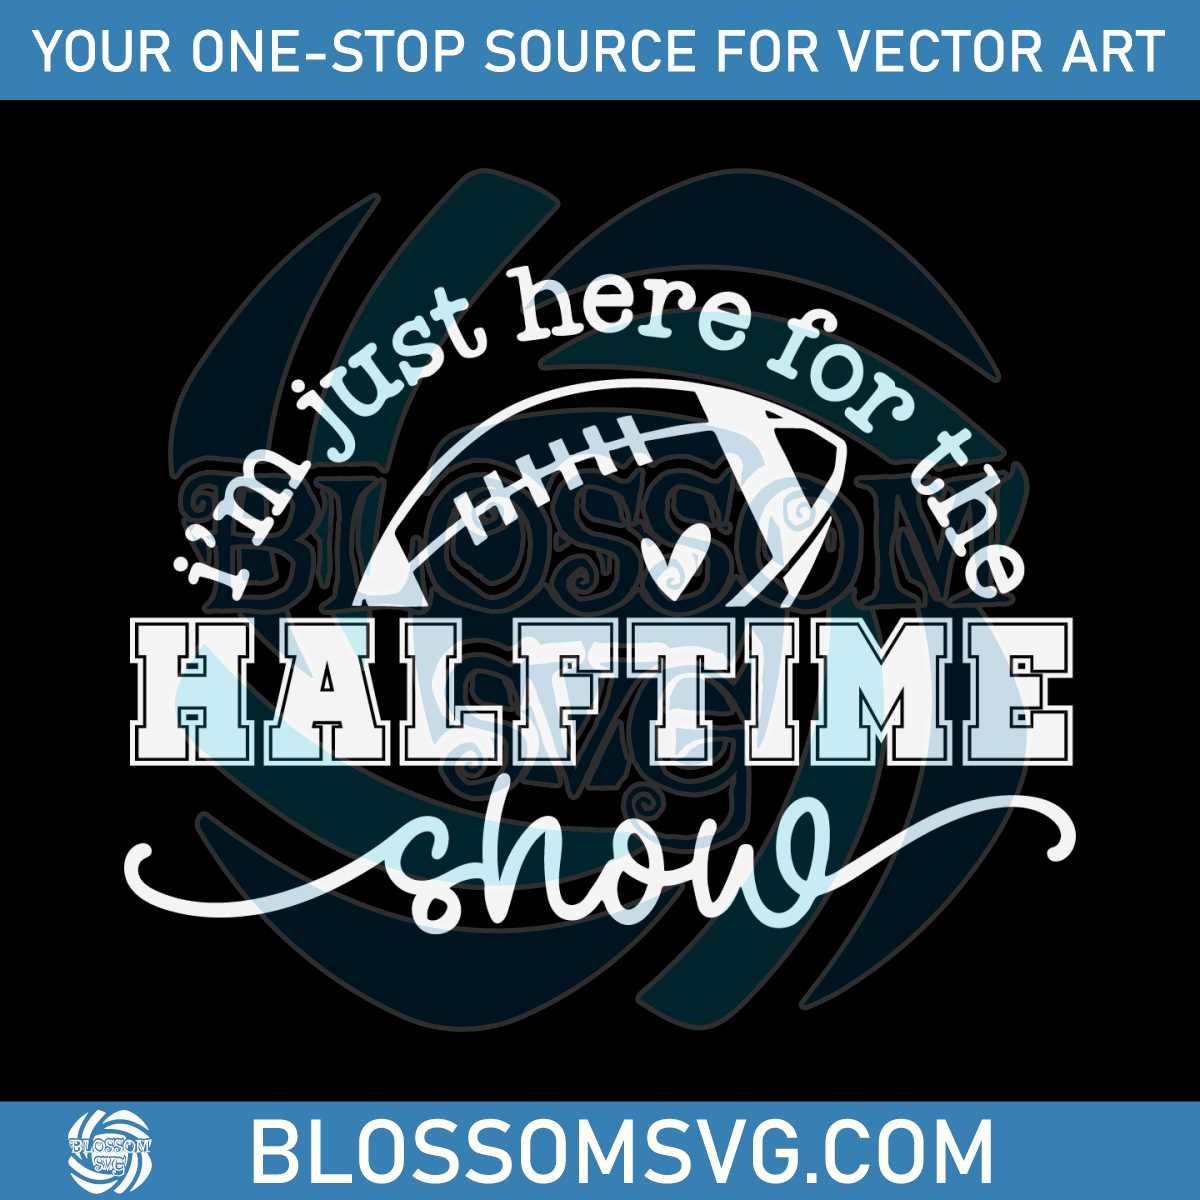 football-game-day-just-here-for-the-halftime-show-svg